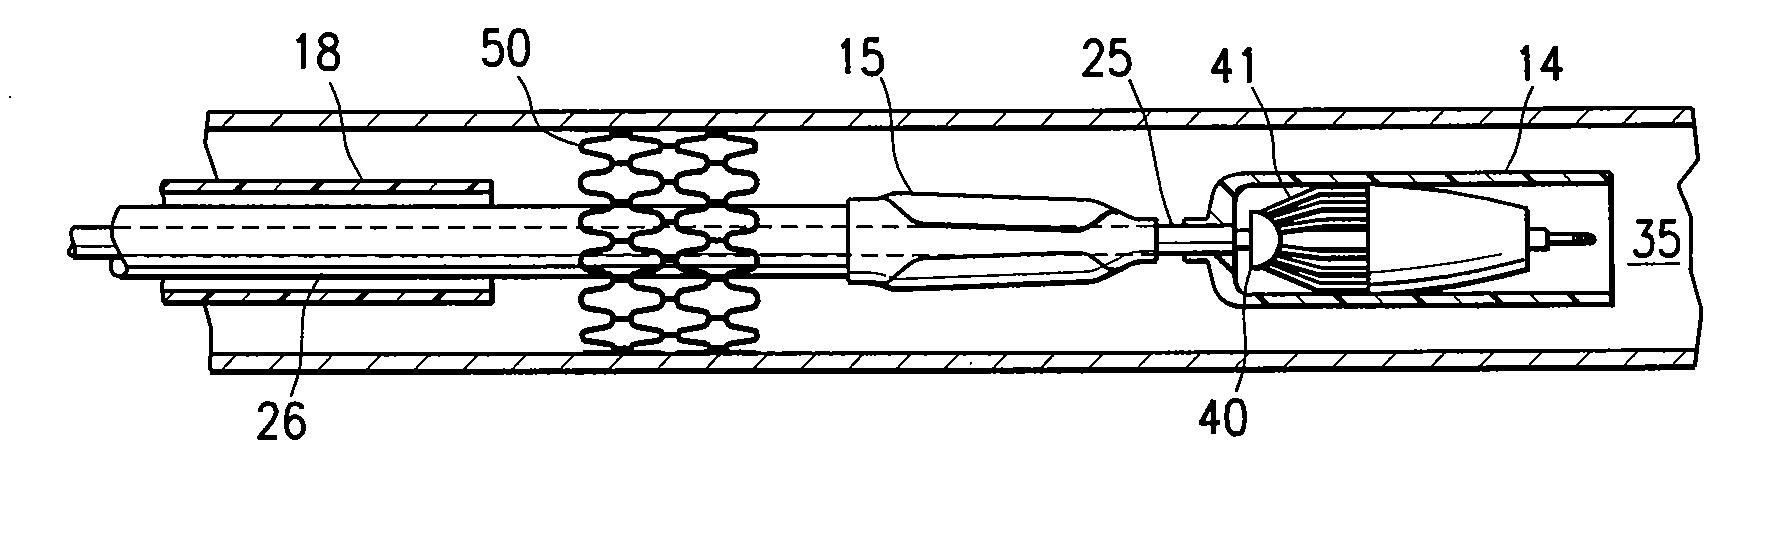 Balloon catheter having a regrooming sheath and method for collapsing an expanded medical device